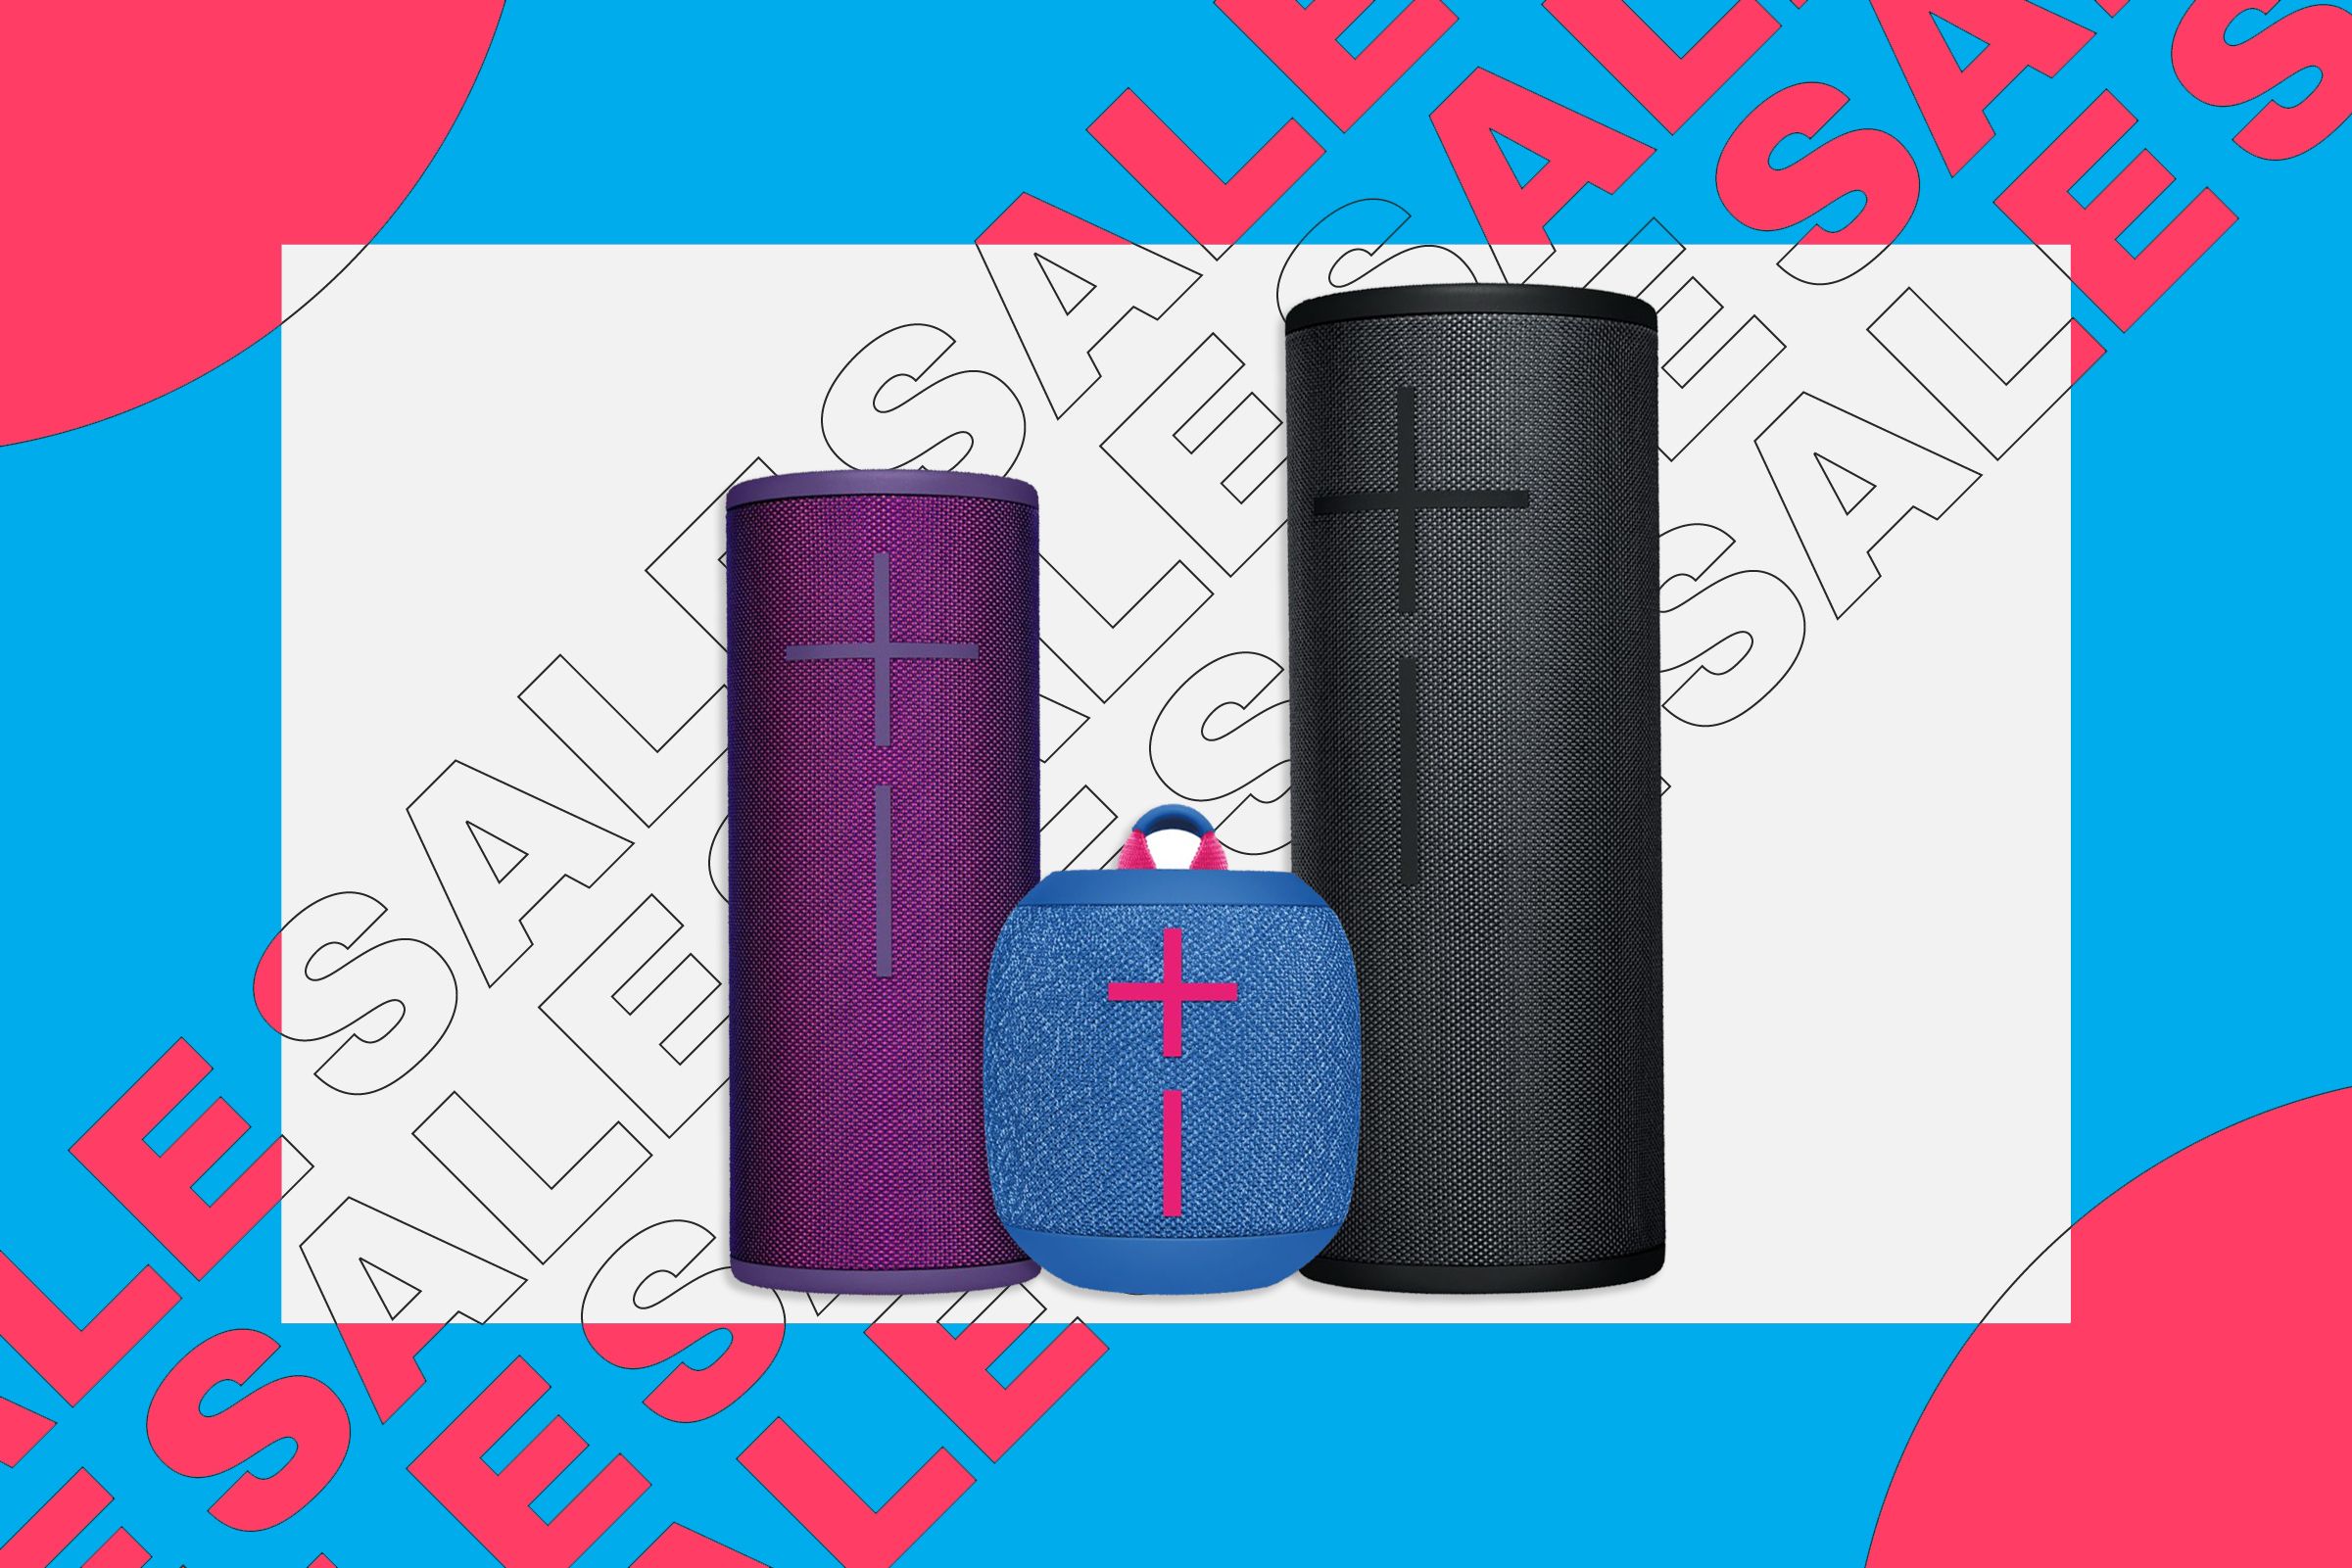 Ultimate Ears portable speaker with sale illustration in the background.